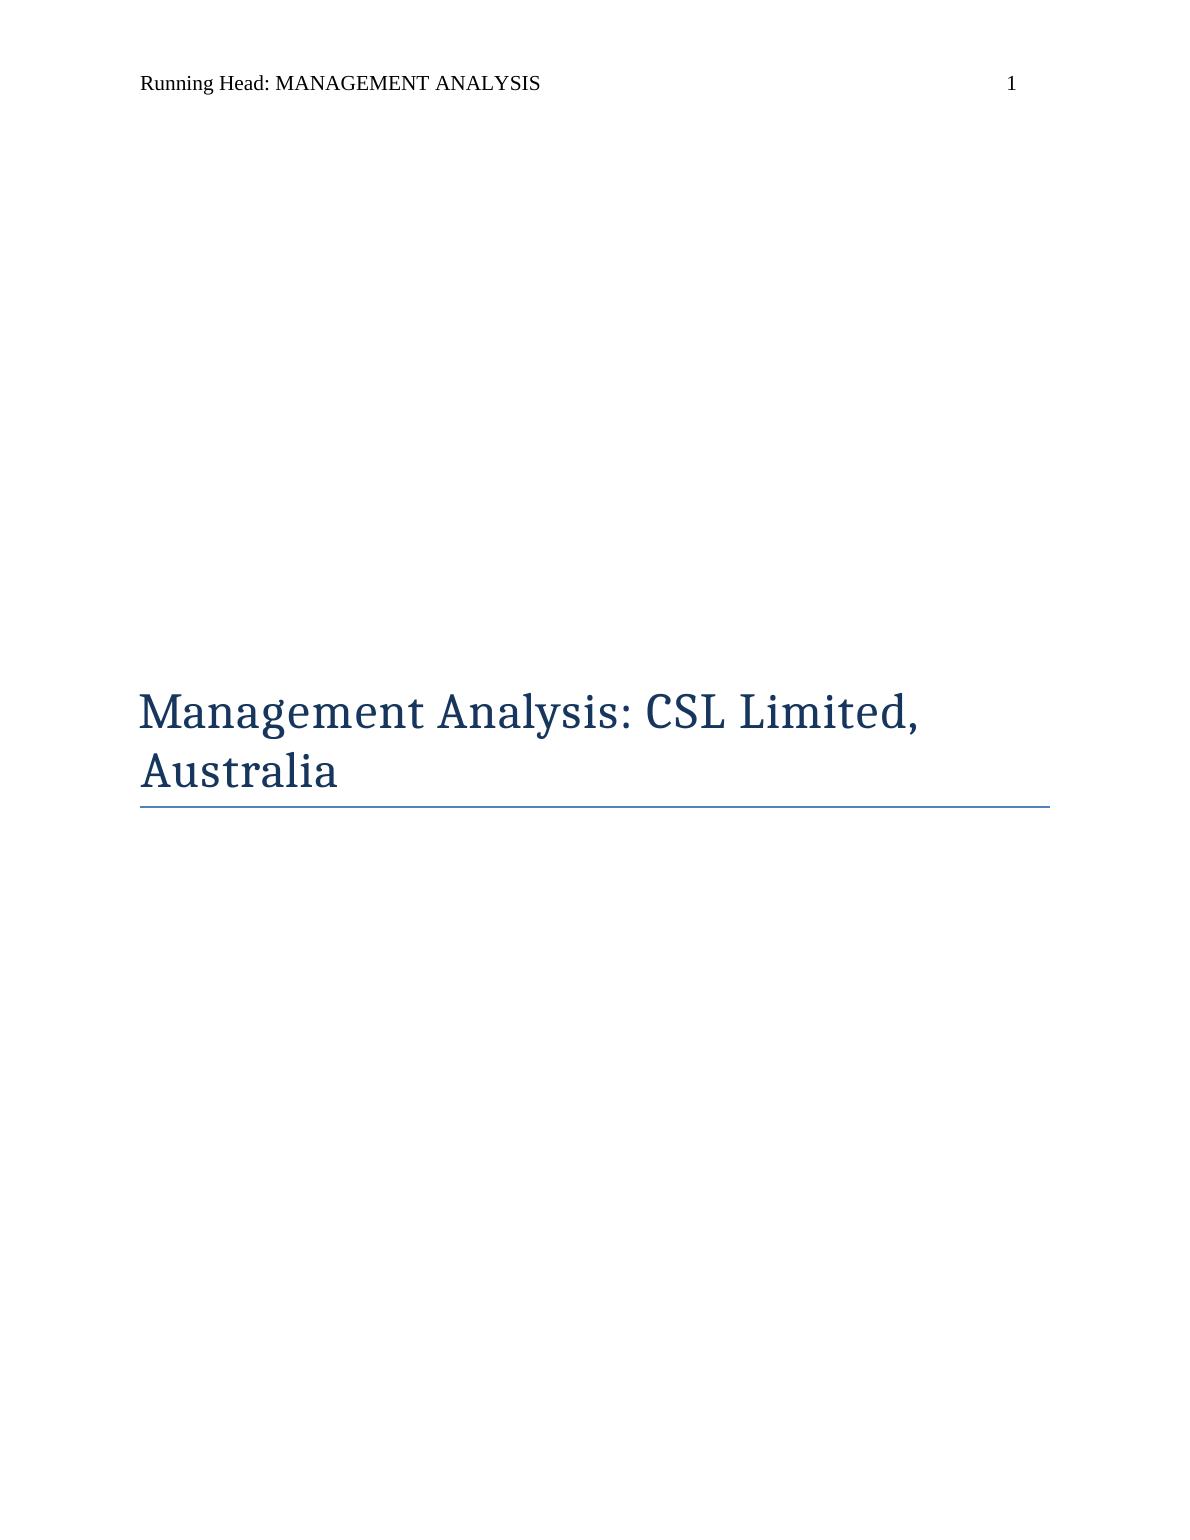 Management Analysis of CSL Limited_1